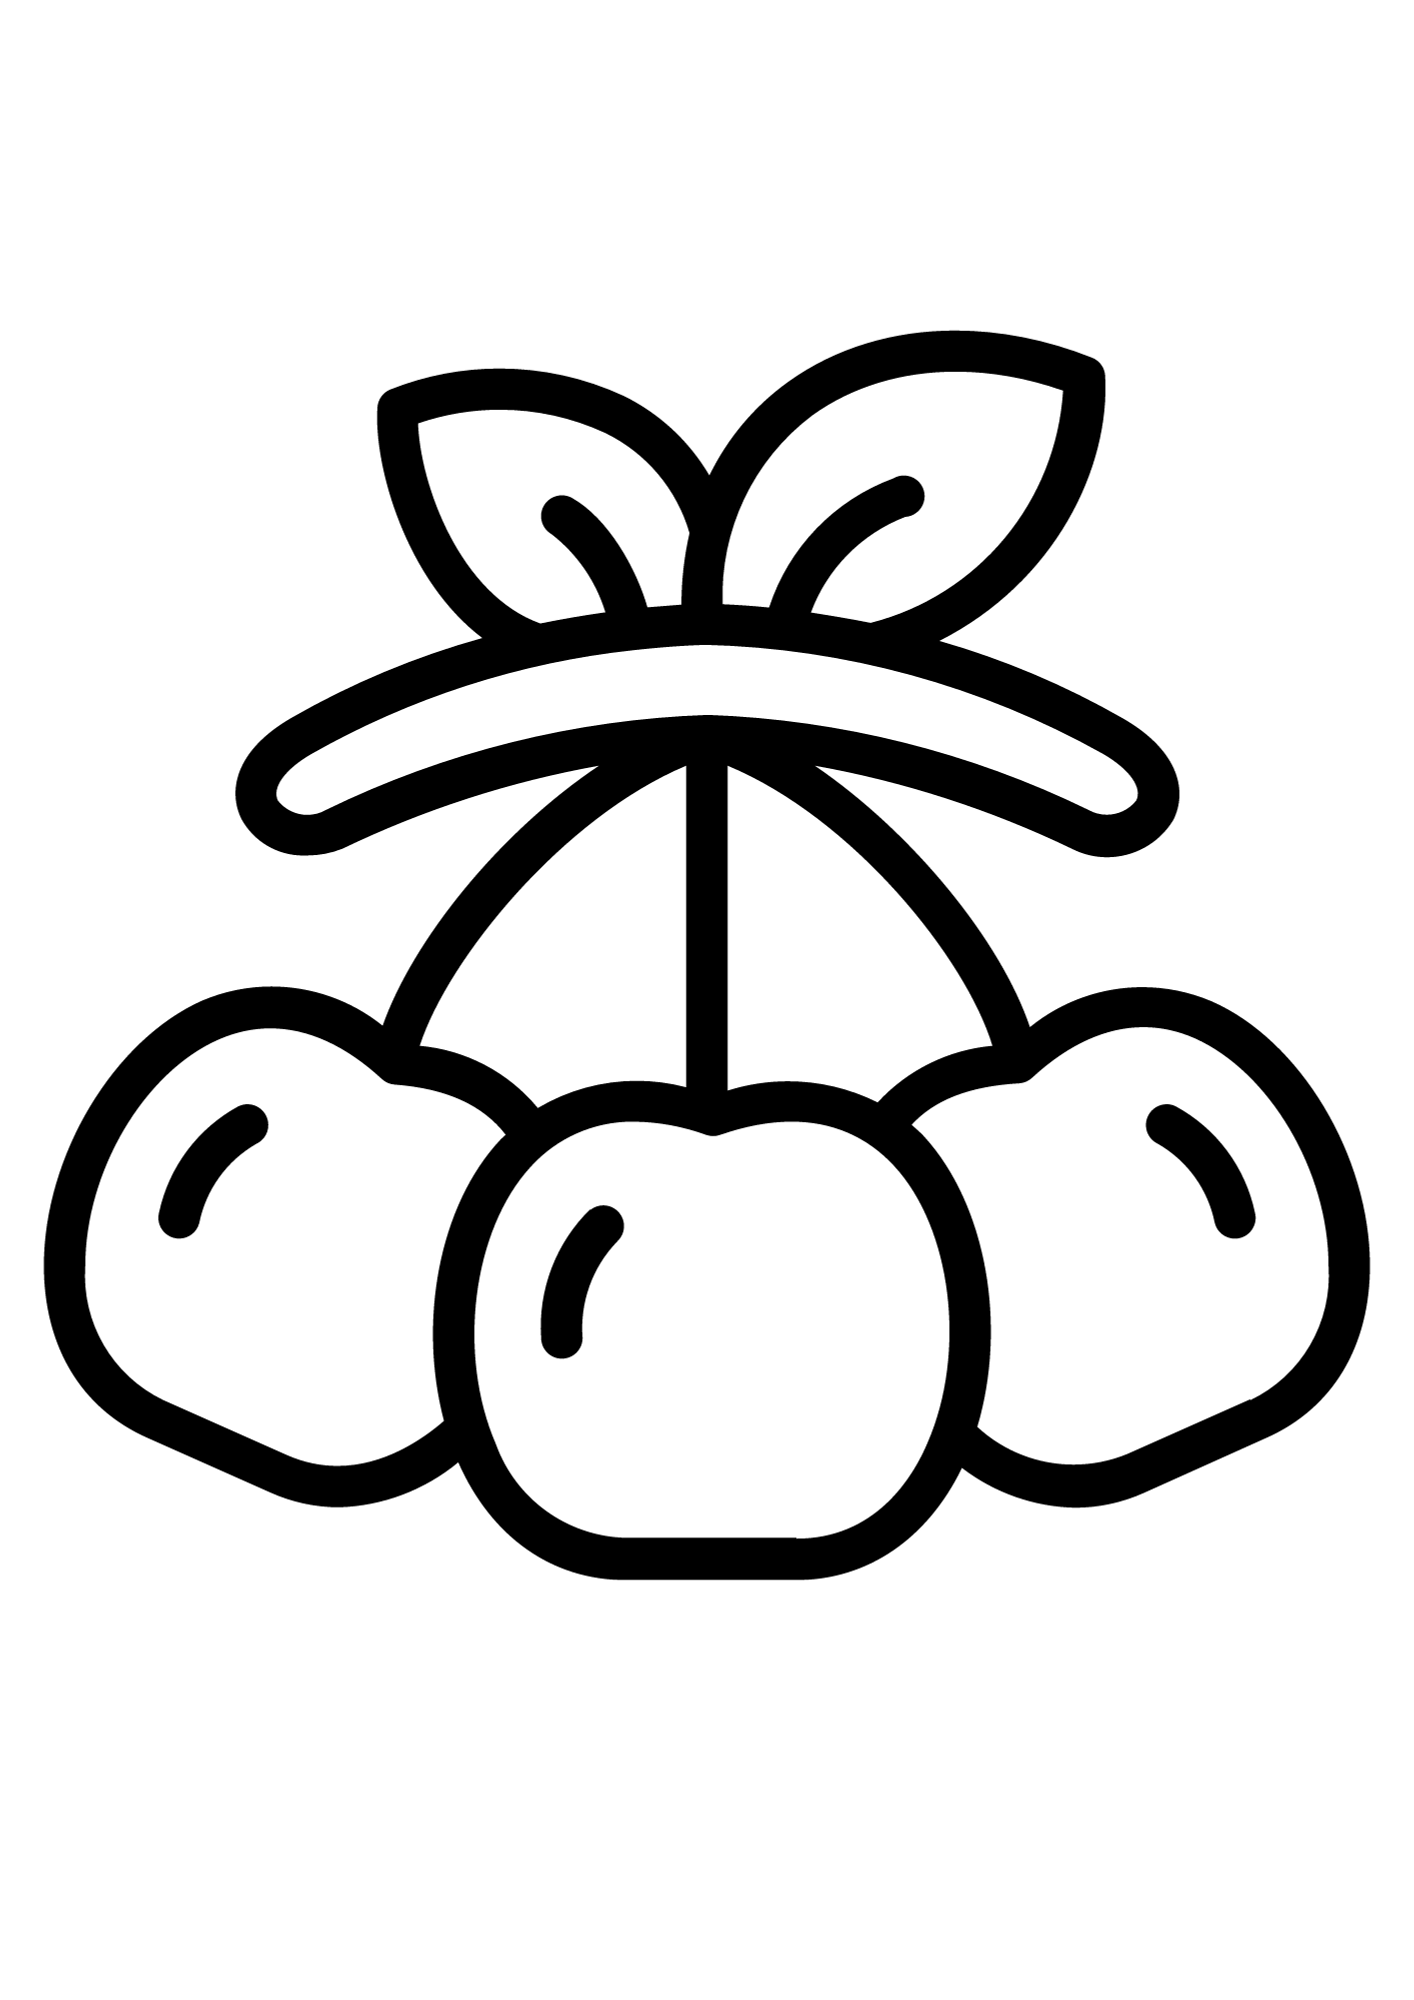 Cherry For Children Image Coloring Pages